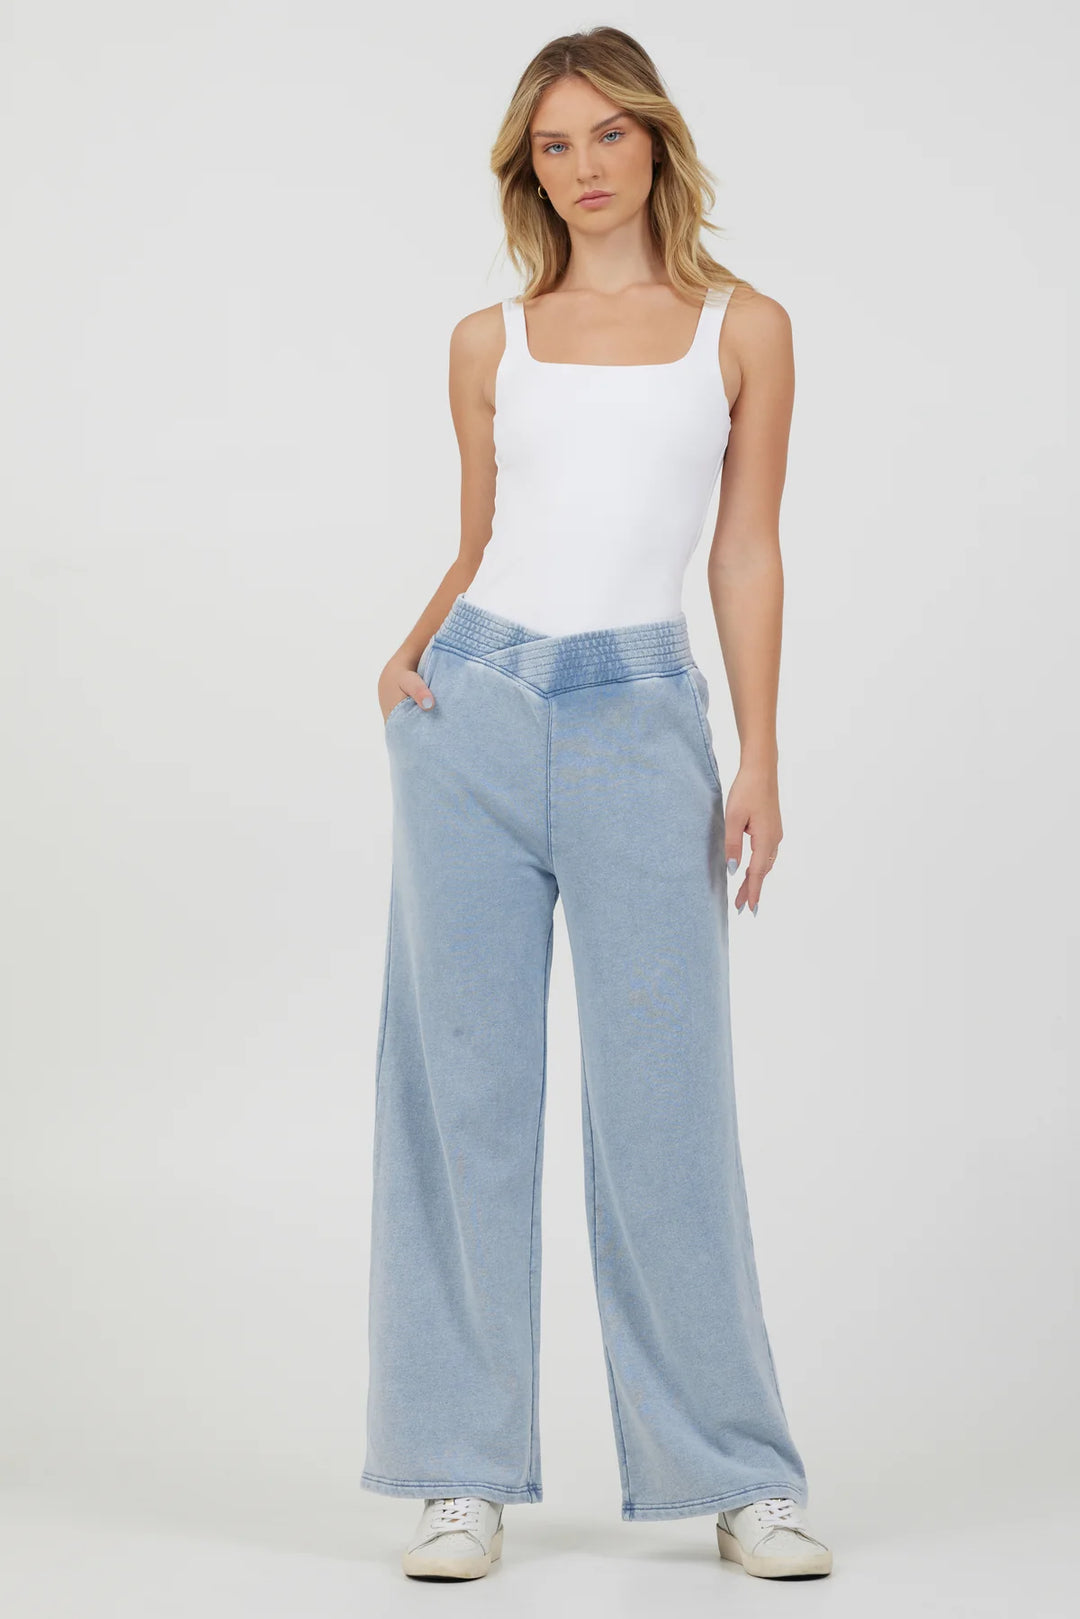 Washed Denim Terry Pant